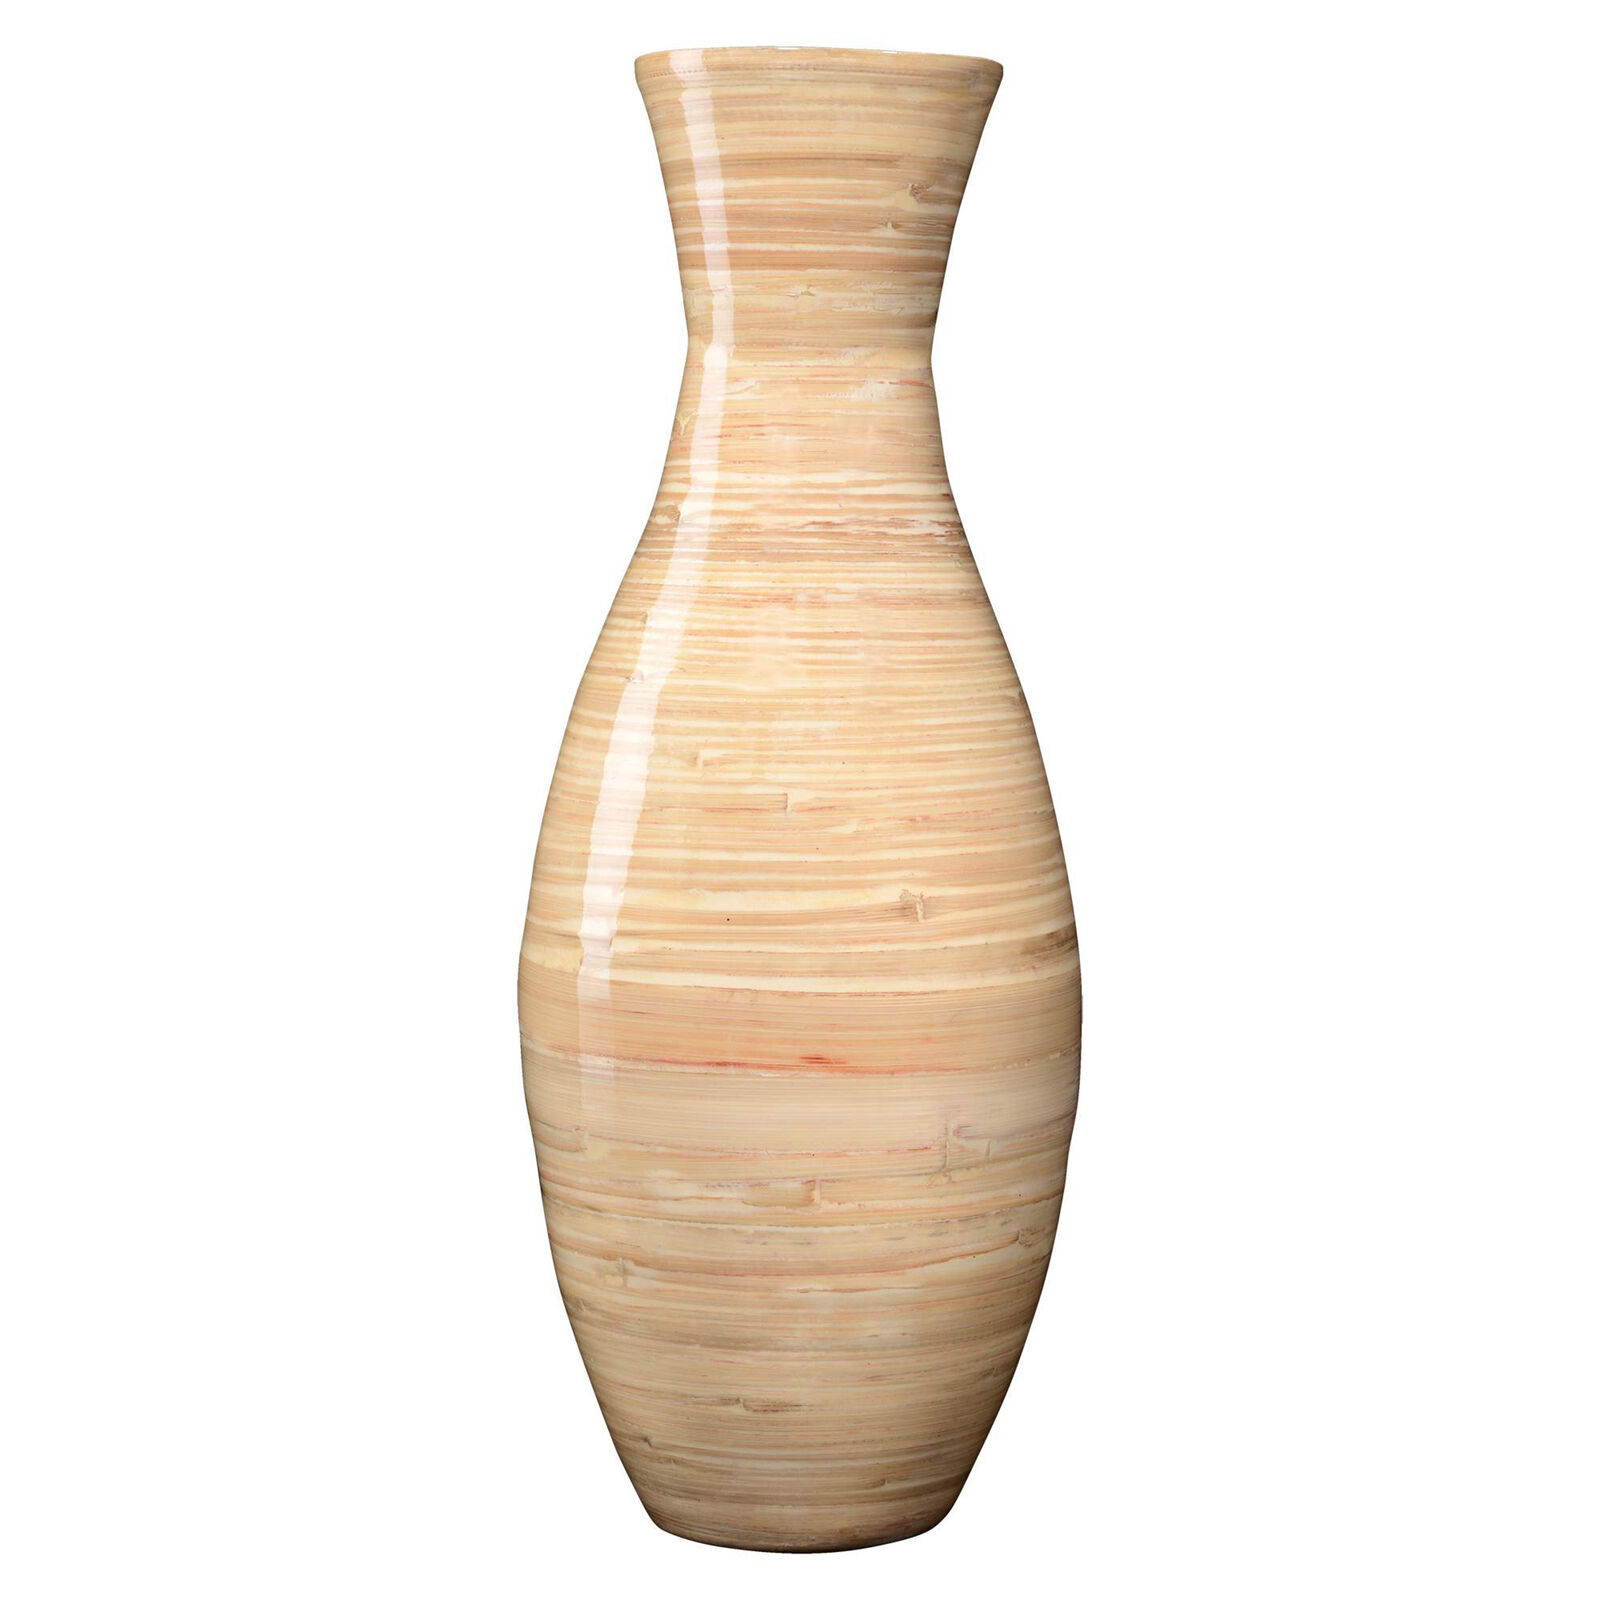 Handcrafted 20 In Tall Natural Bamboo Vase Decorative Classic Floor Vase